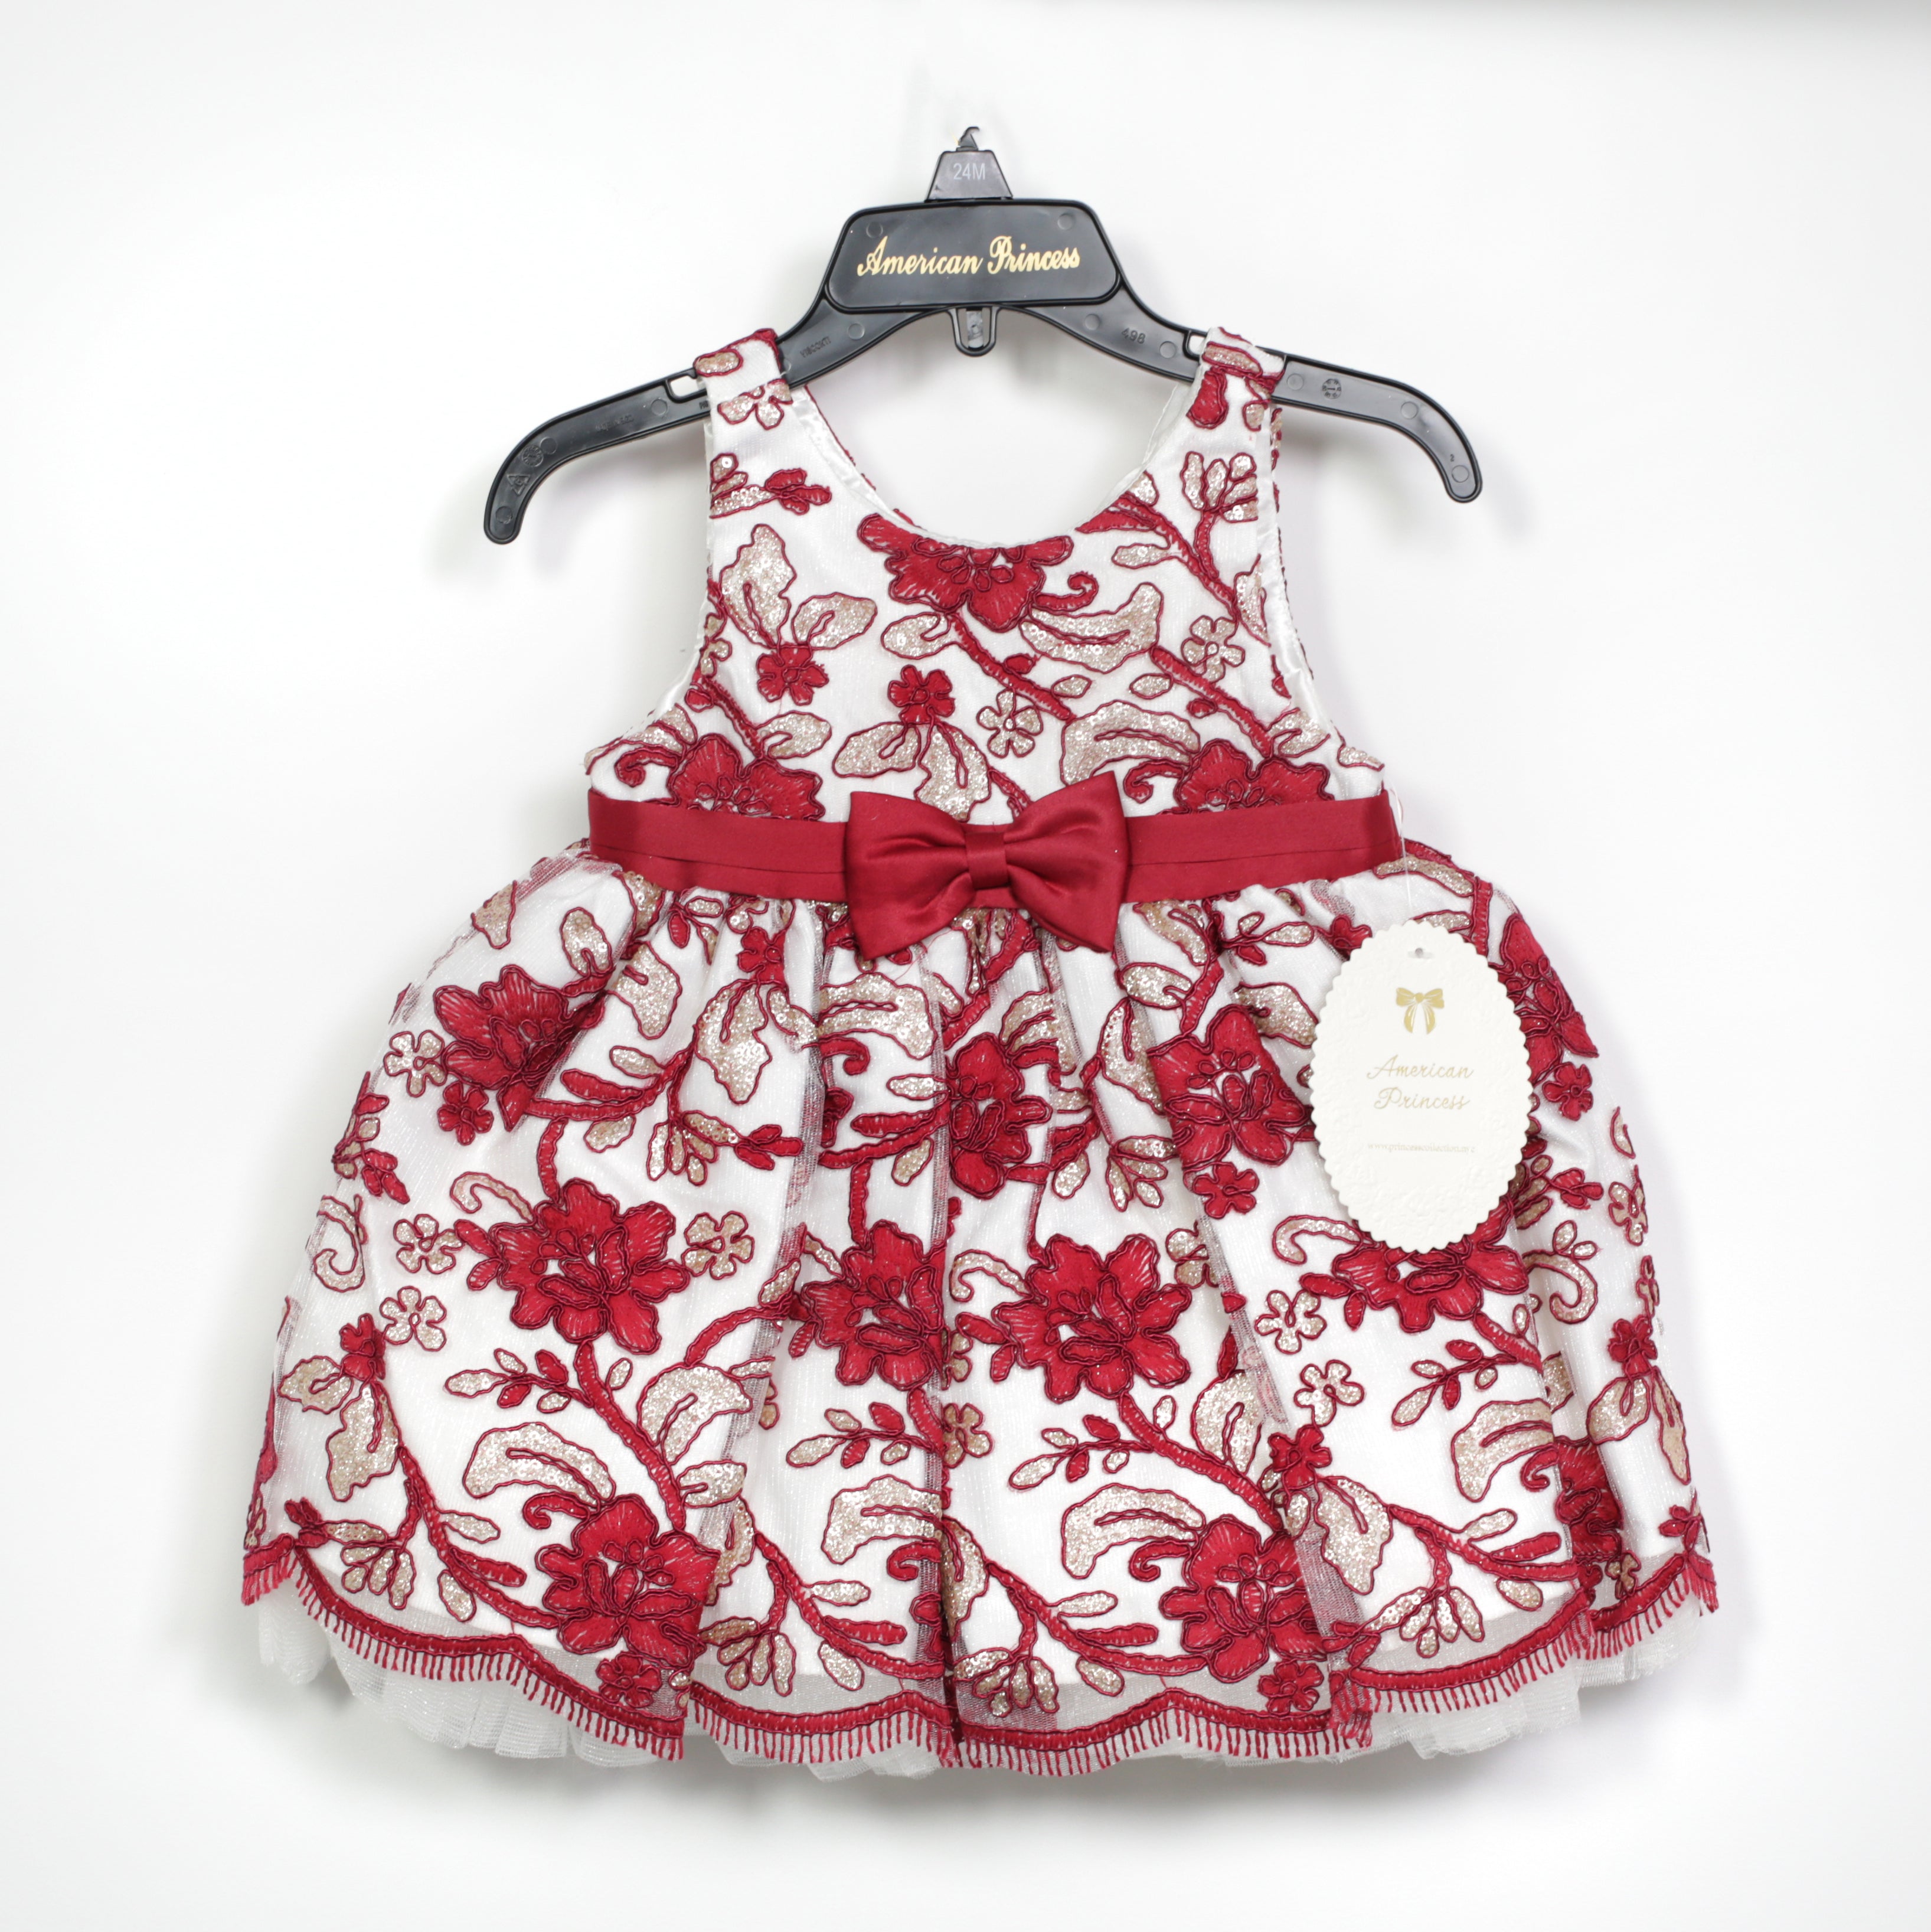 American Princess Dress - Red Floral with Bow